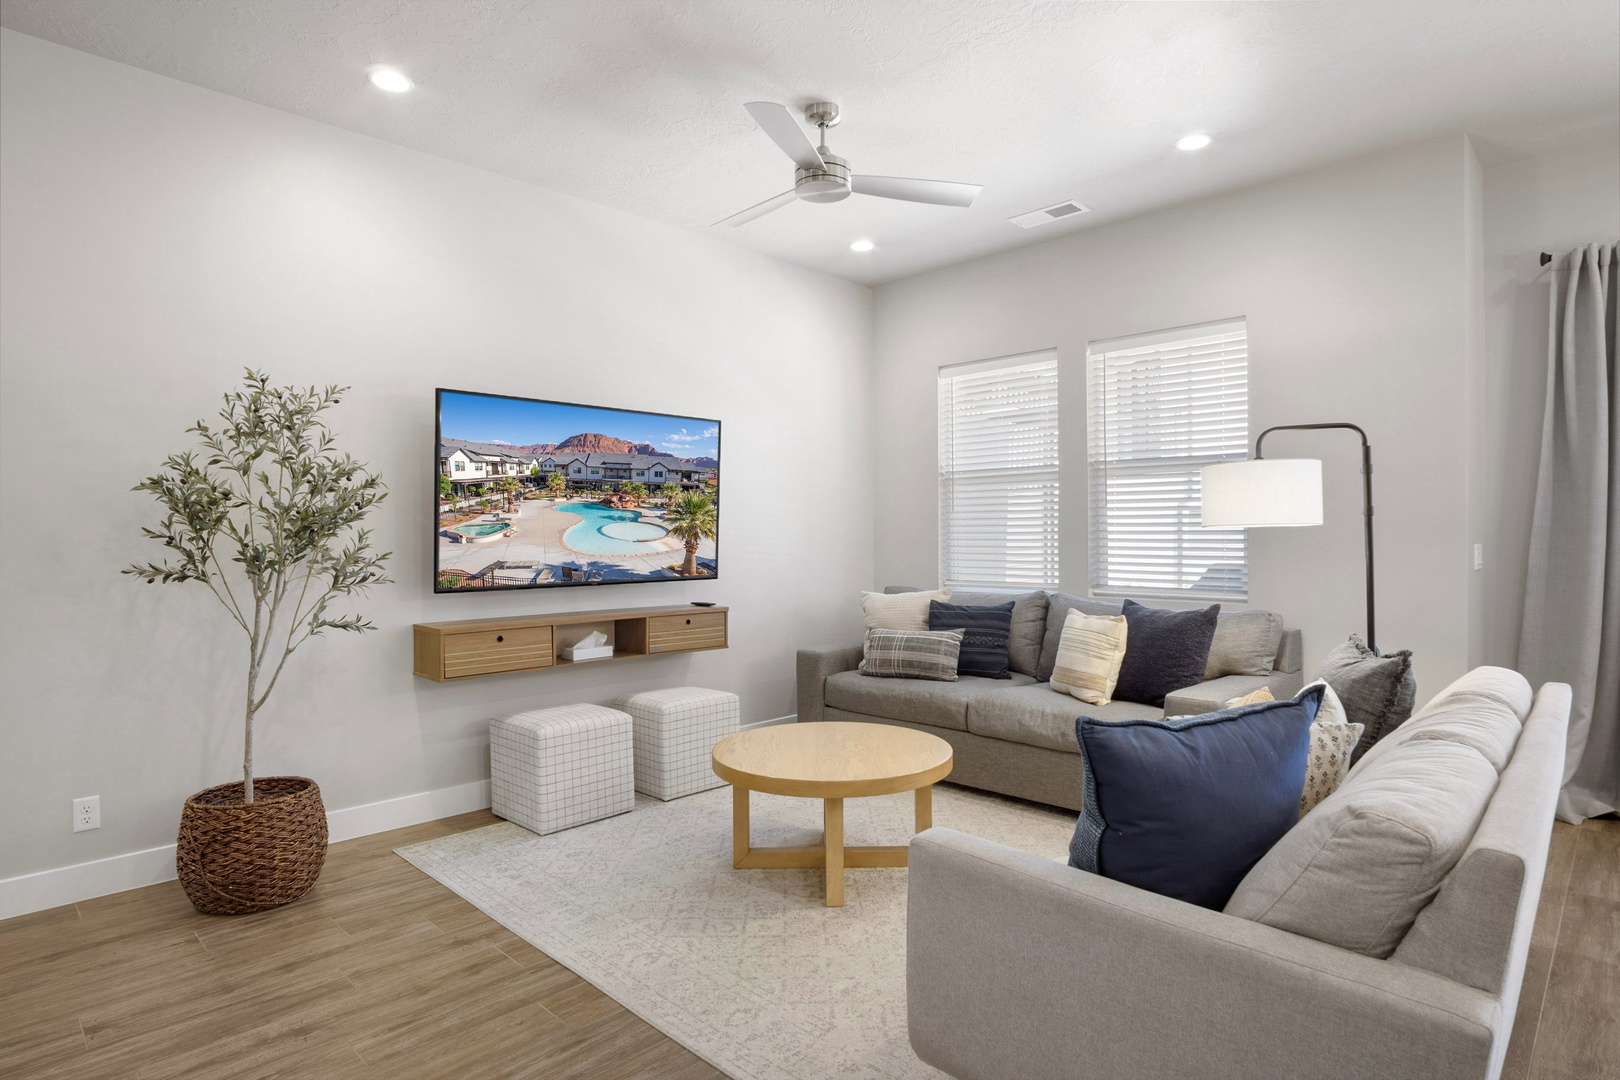 Ample seating for family and friends in the living area with TV